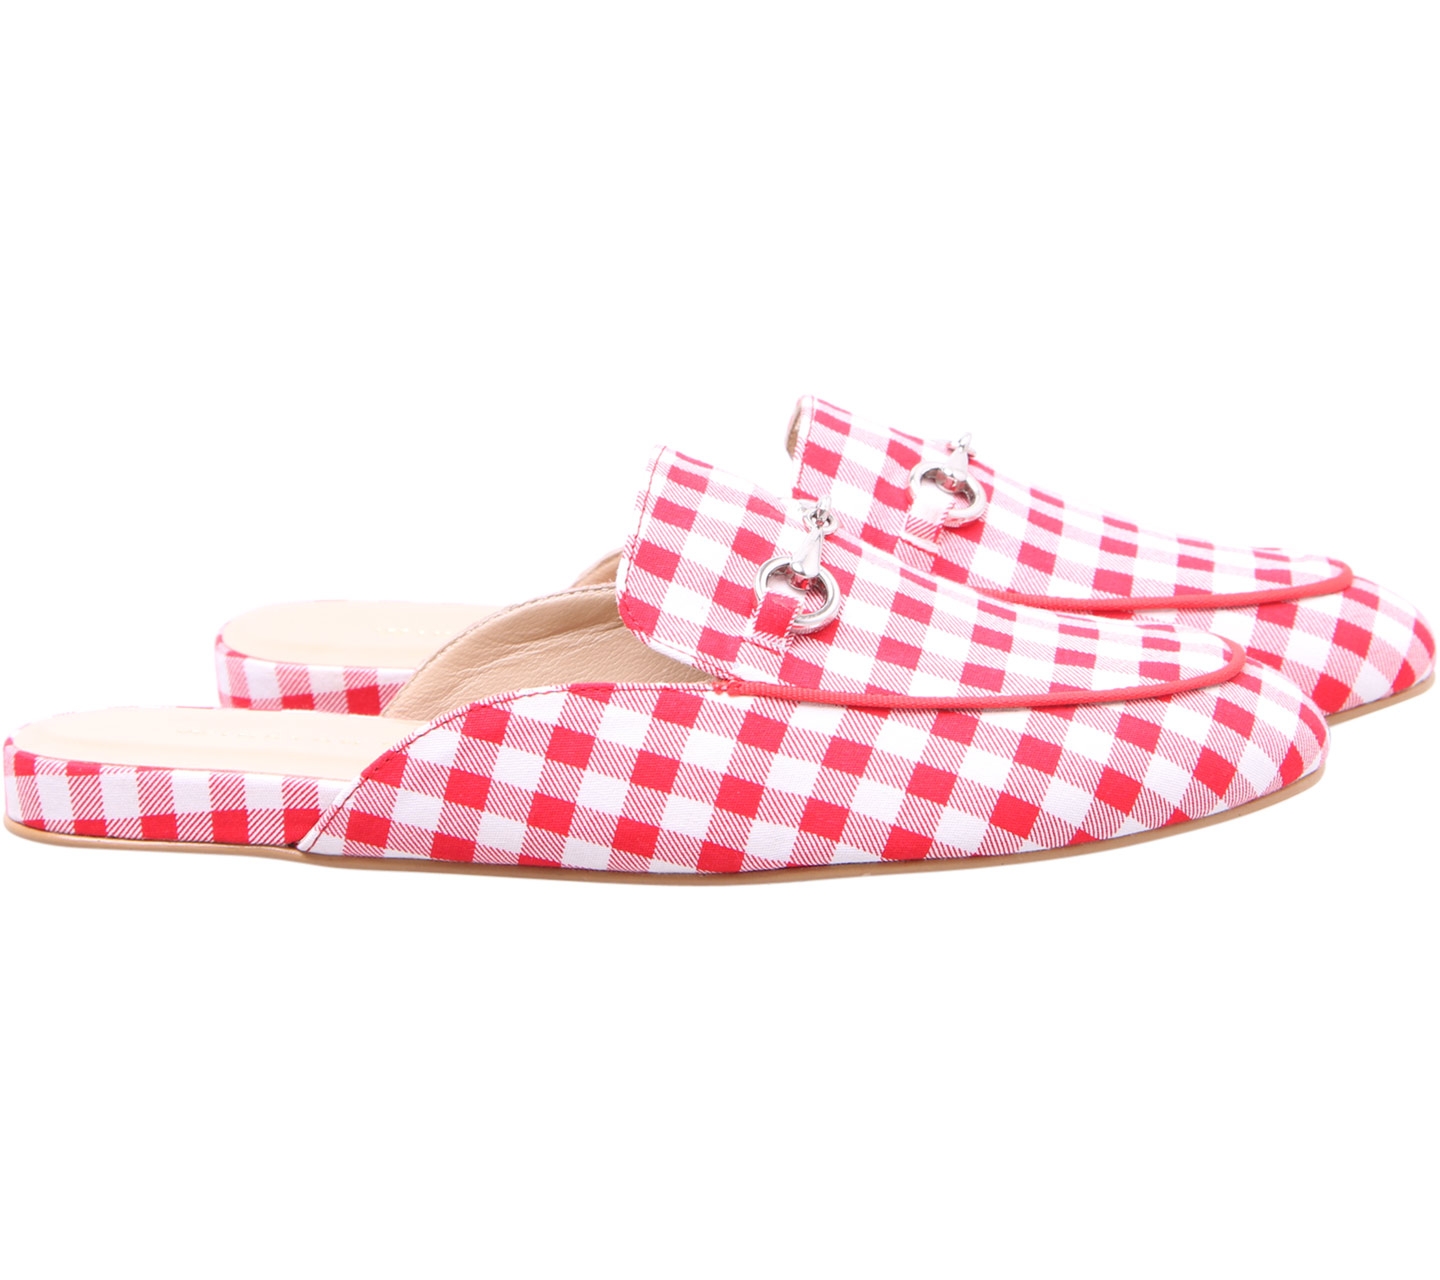 Winston Smith Red & White Plaid Mules Sandals